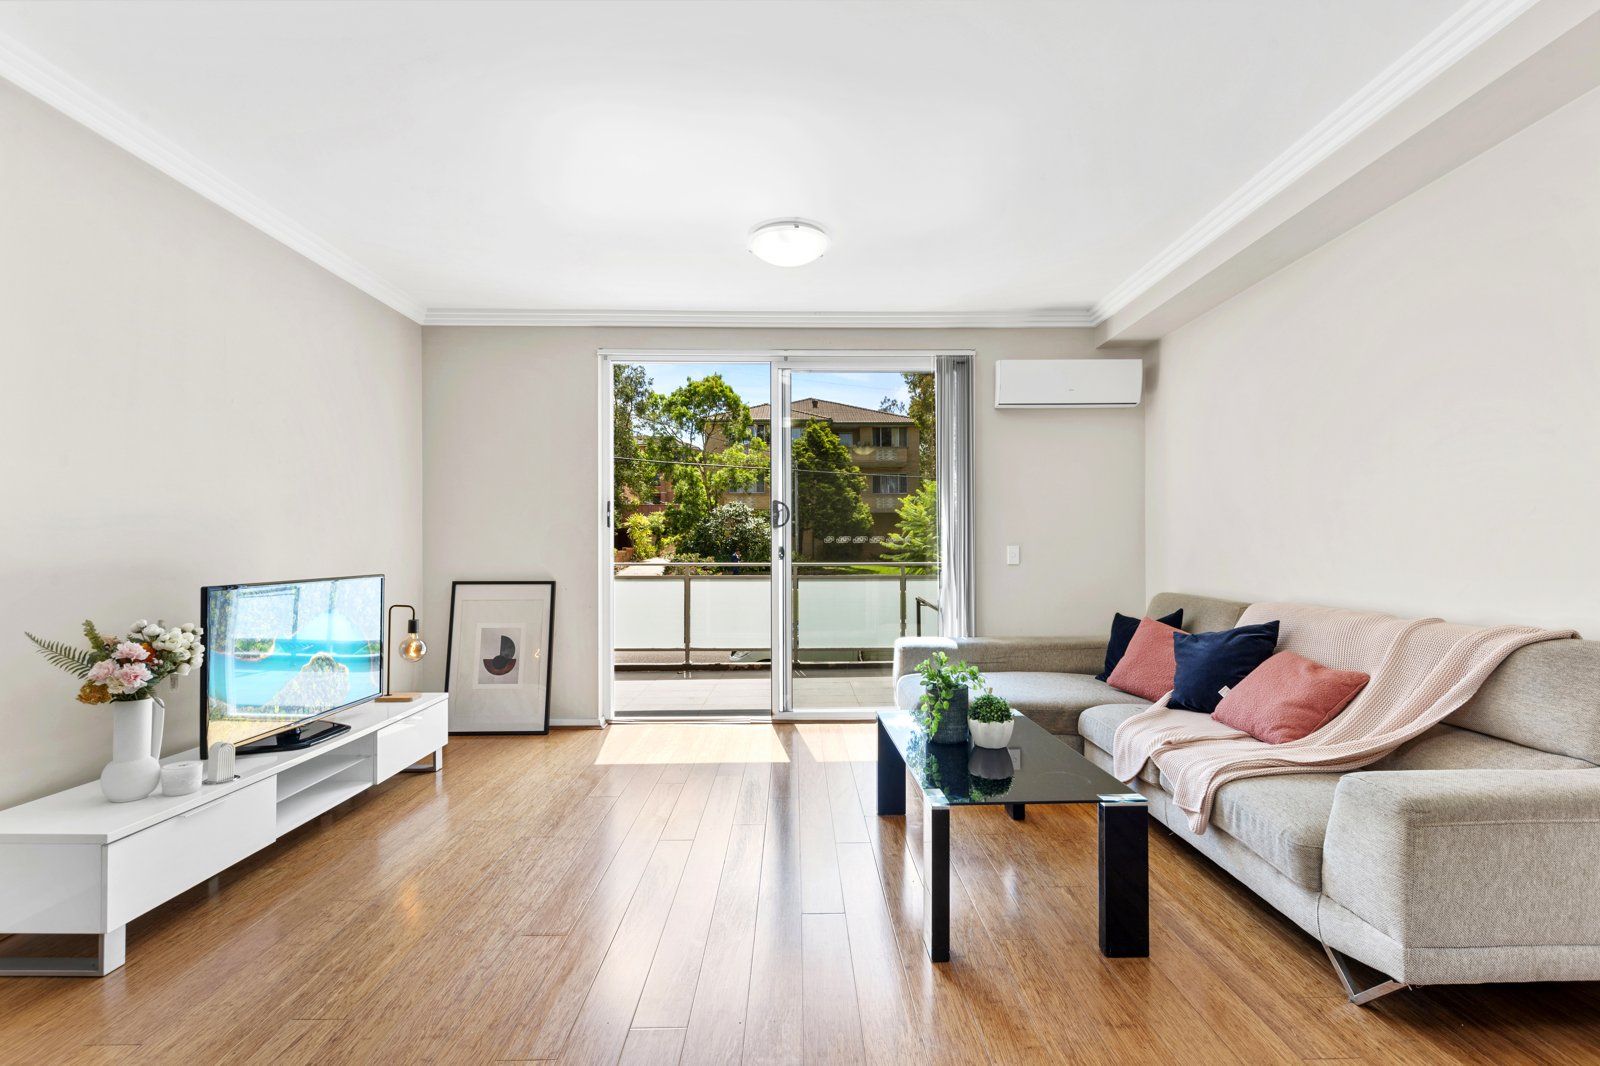 2 bedrooms Apartment / Unit / Flat in 5/11 O'reilly Street PARRAMATTA NSW, 2150